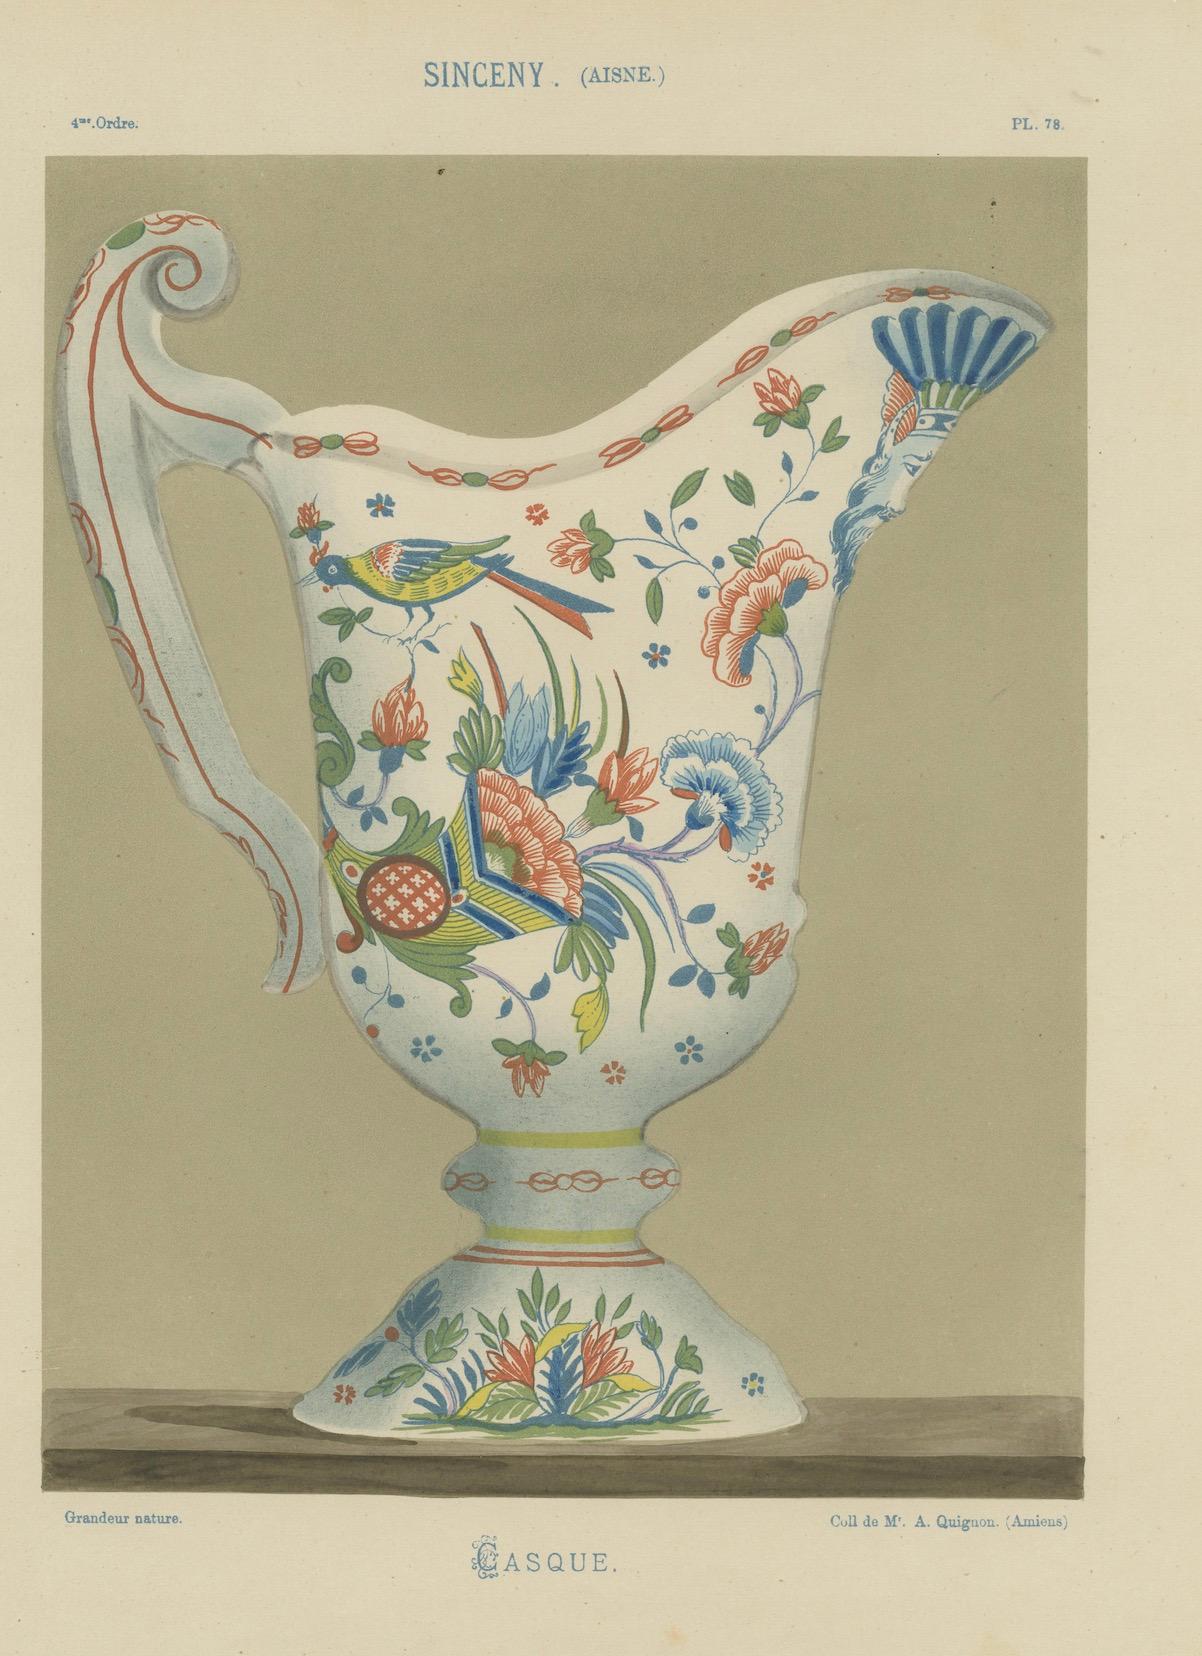 Paper Avian Elegance: Sinceny Vase - A Chromolithograph Tribute, 1874 For Sale